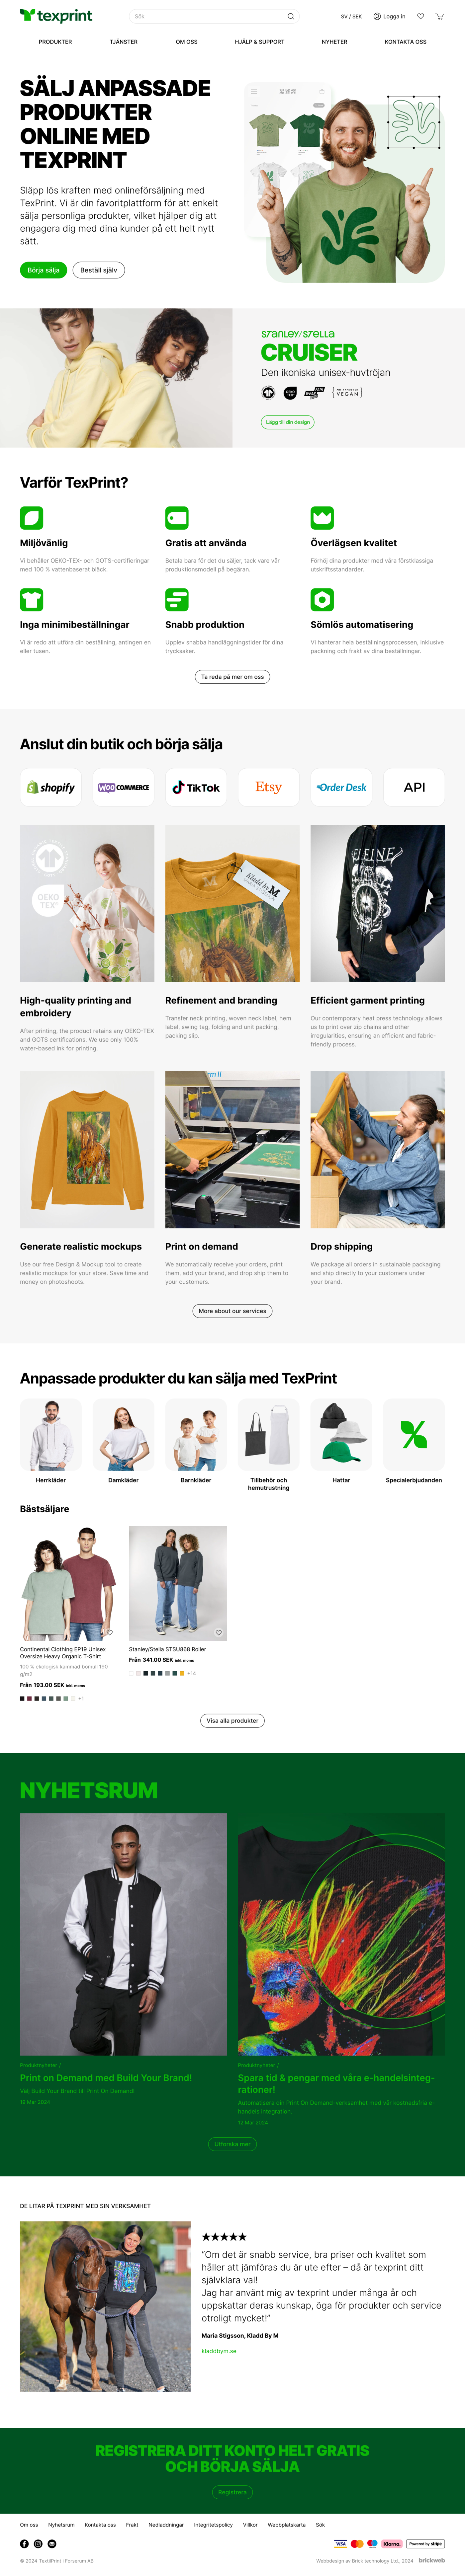 TexPrint Home page